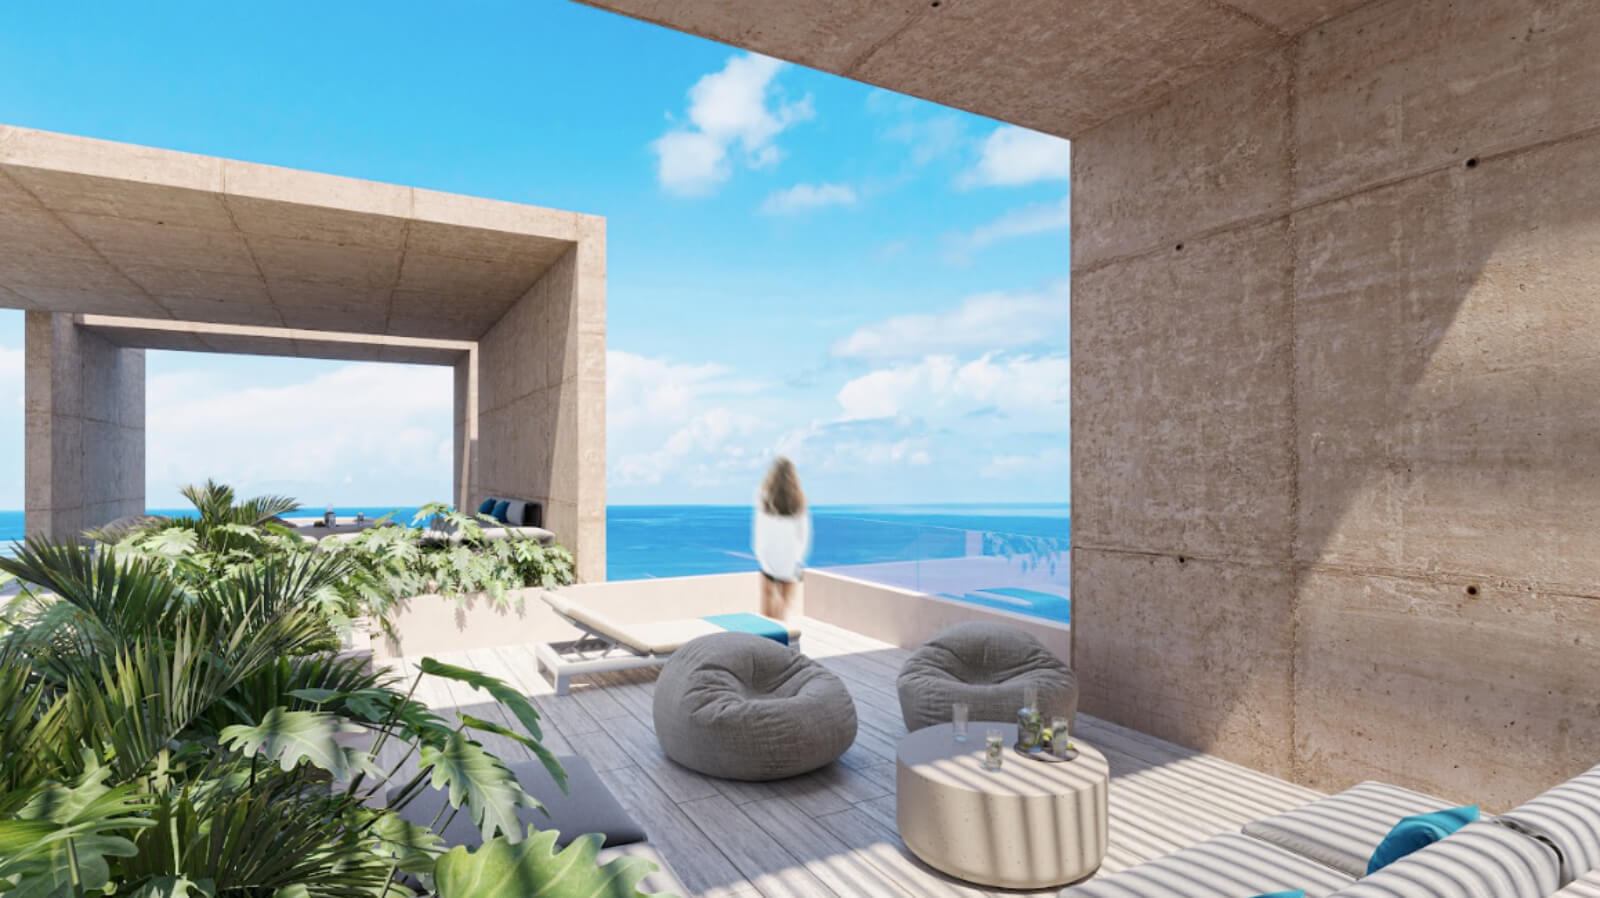 Ocean view apartment, 2 jacuzzis, lock off system, private beach, gym, pet area, and more pre-construction, Puerto Morelos for sale.